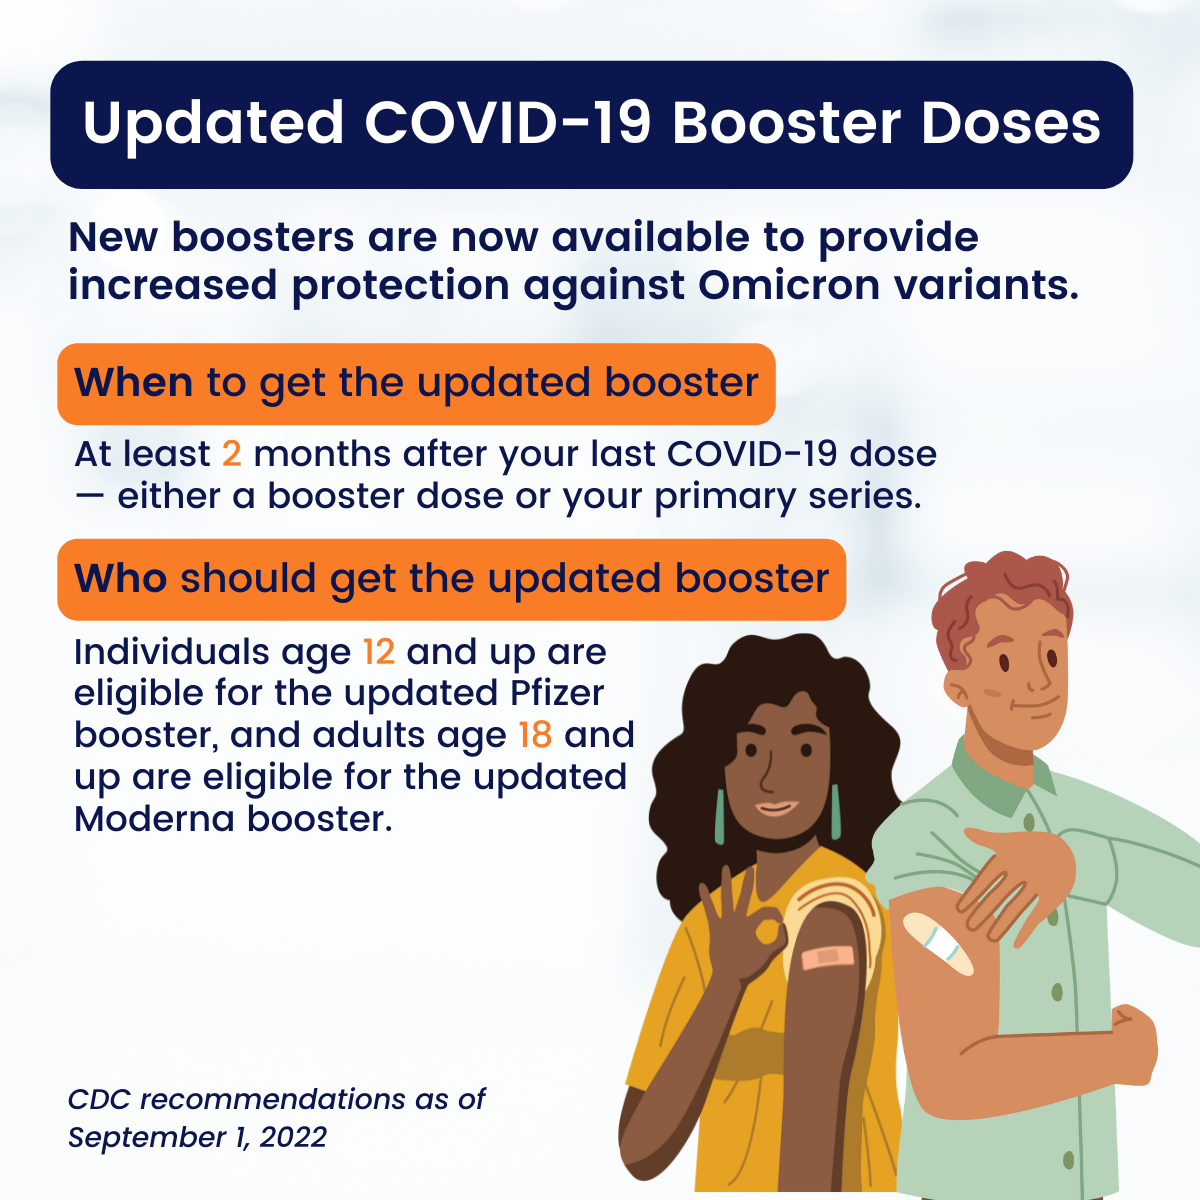 Square image with white background and navy, orange and white text communicates information about updated COVID-19 booster doses. CDC recommendations as of 09/01/2022 is in the bottom left corner. Tan male and Black female are smiling and pointing to a band aid on on their upper arm where they received their booster.